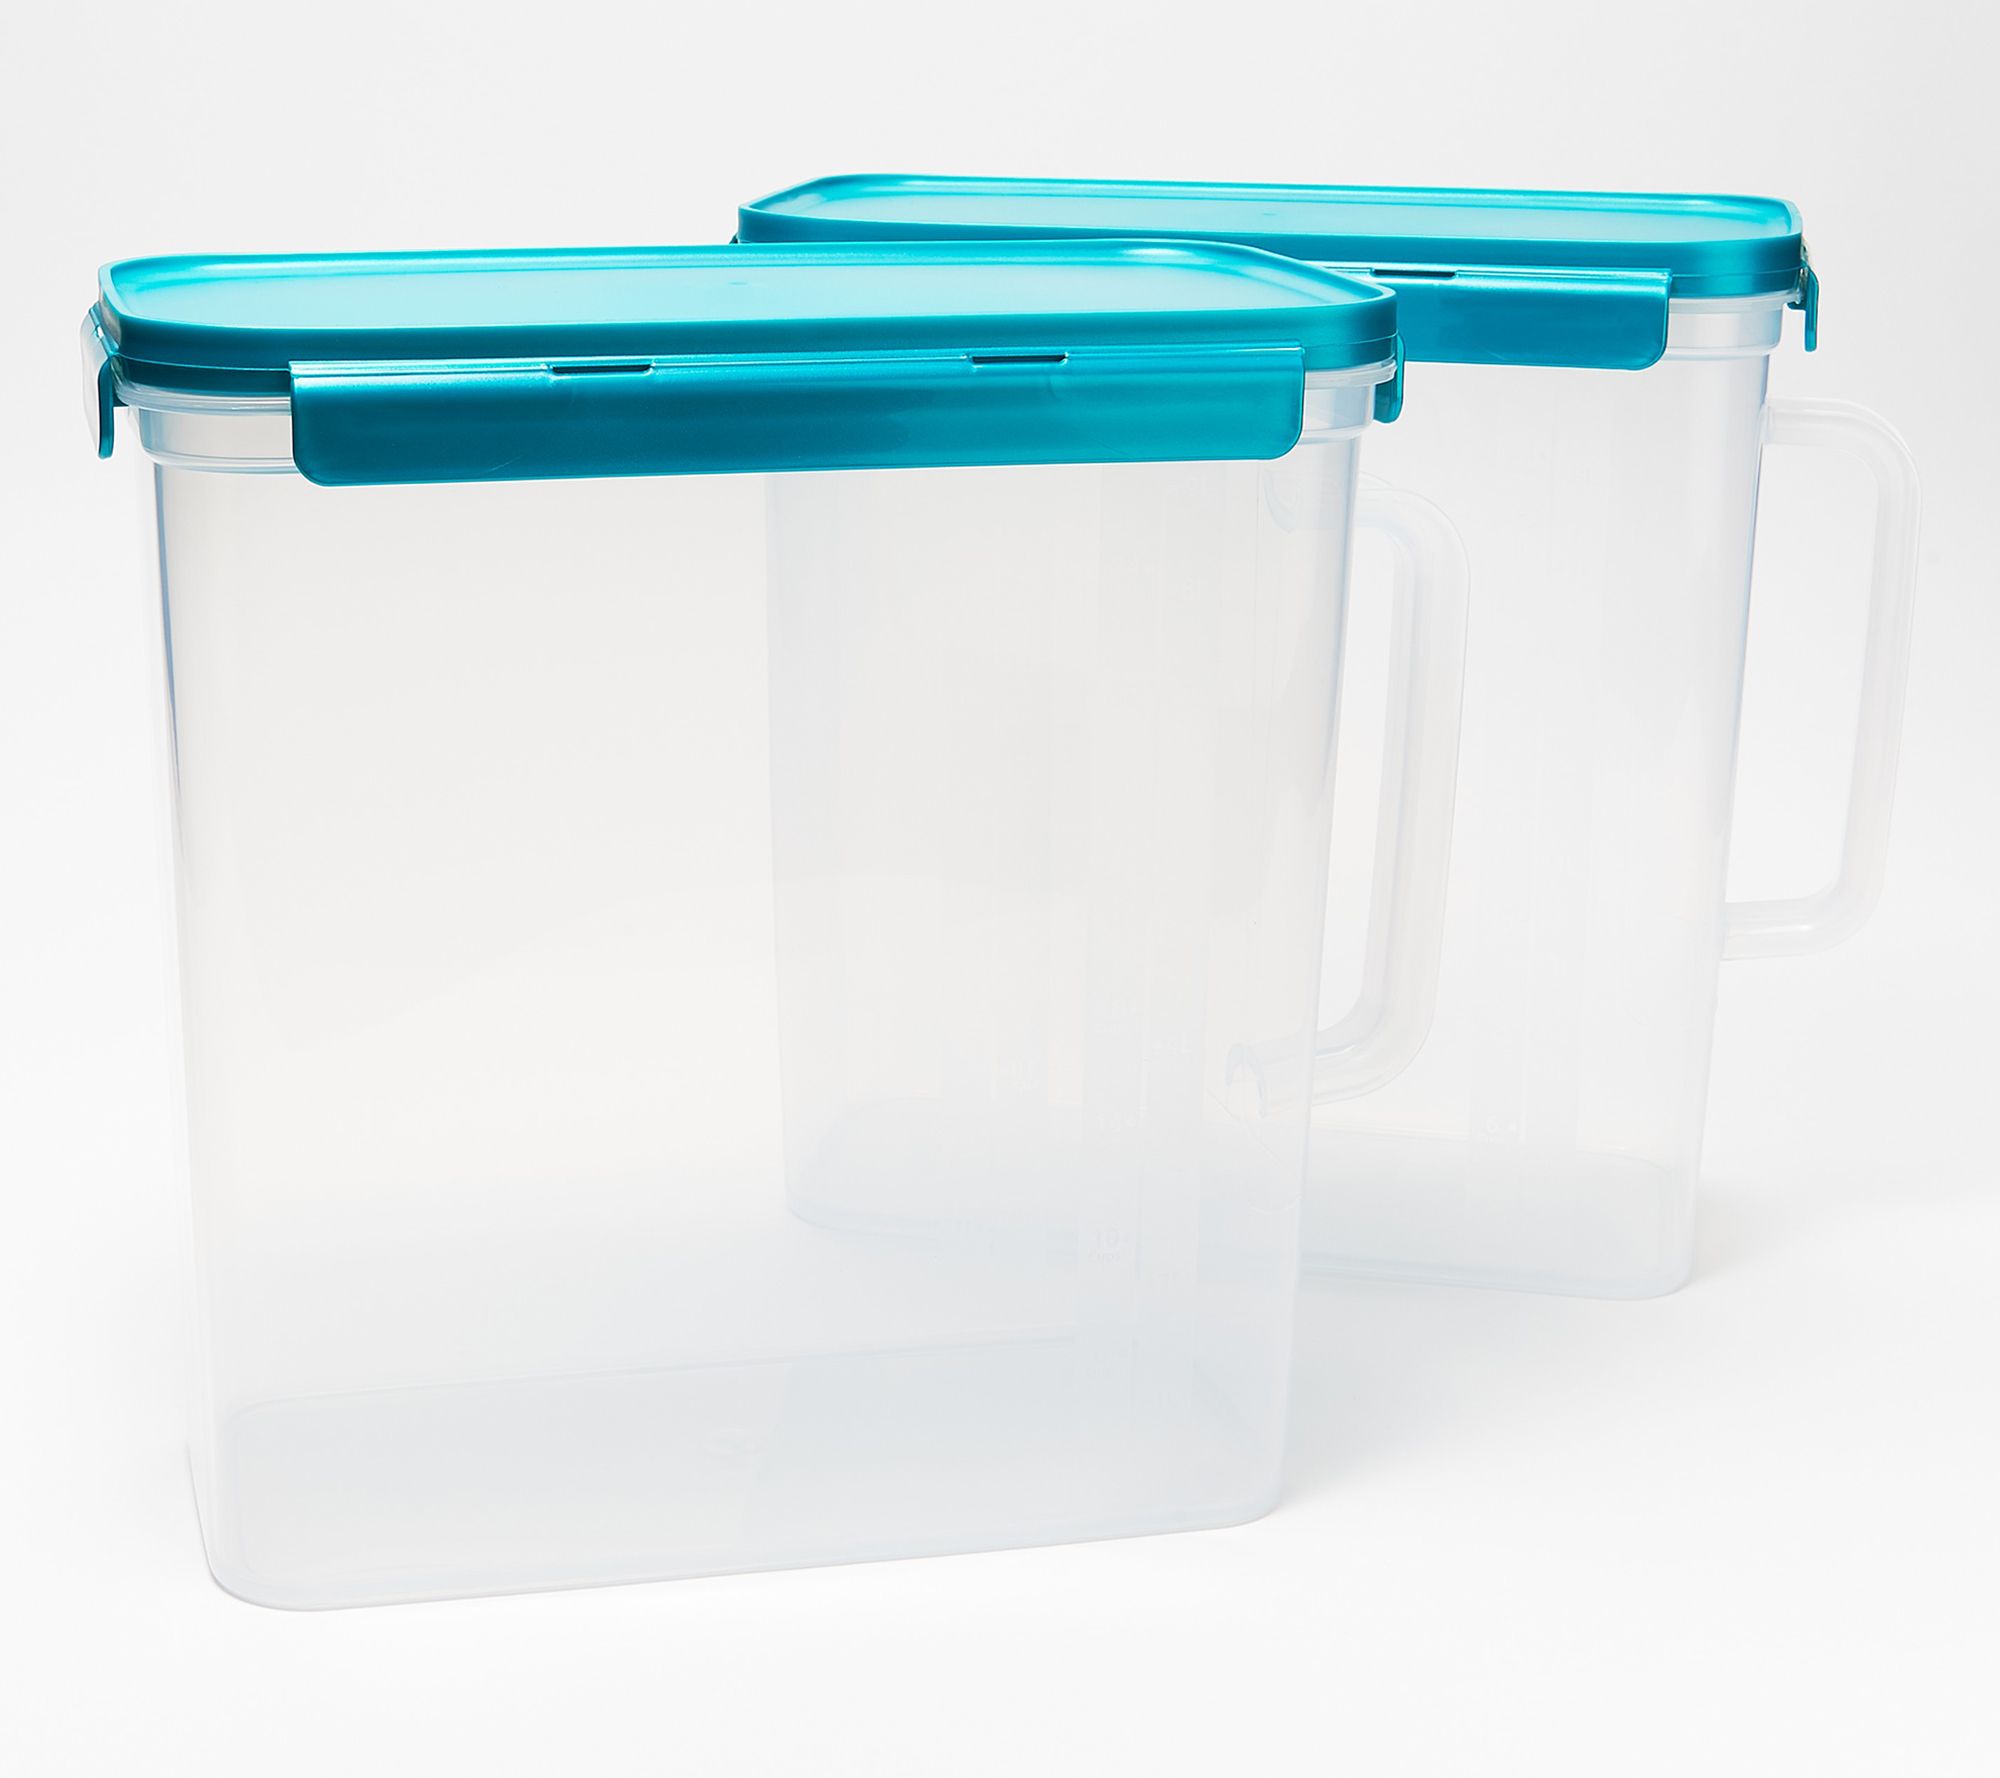 Extra Large Cereal Containers Storage Set - [2 Pack,168oz. 21 cup] Airtight  Silicone Sealed Locking Lids extents freshness - Space Saving Kitchen